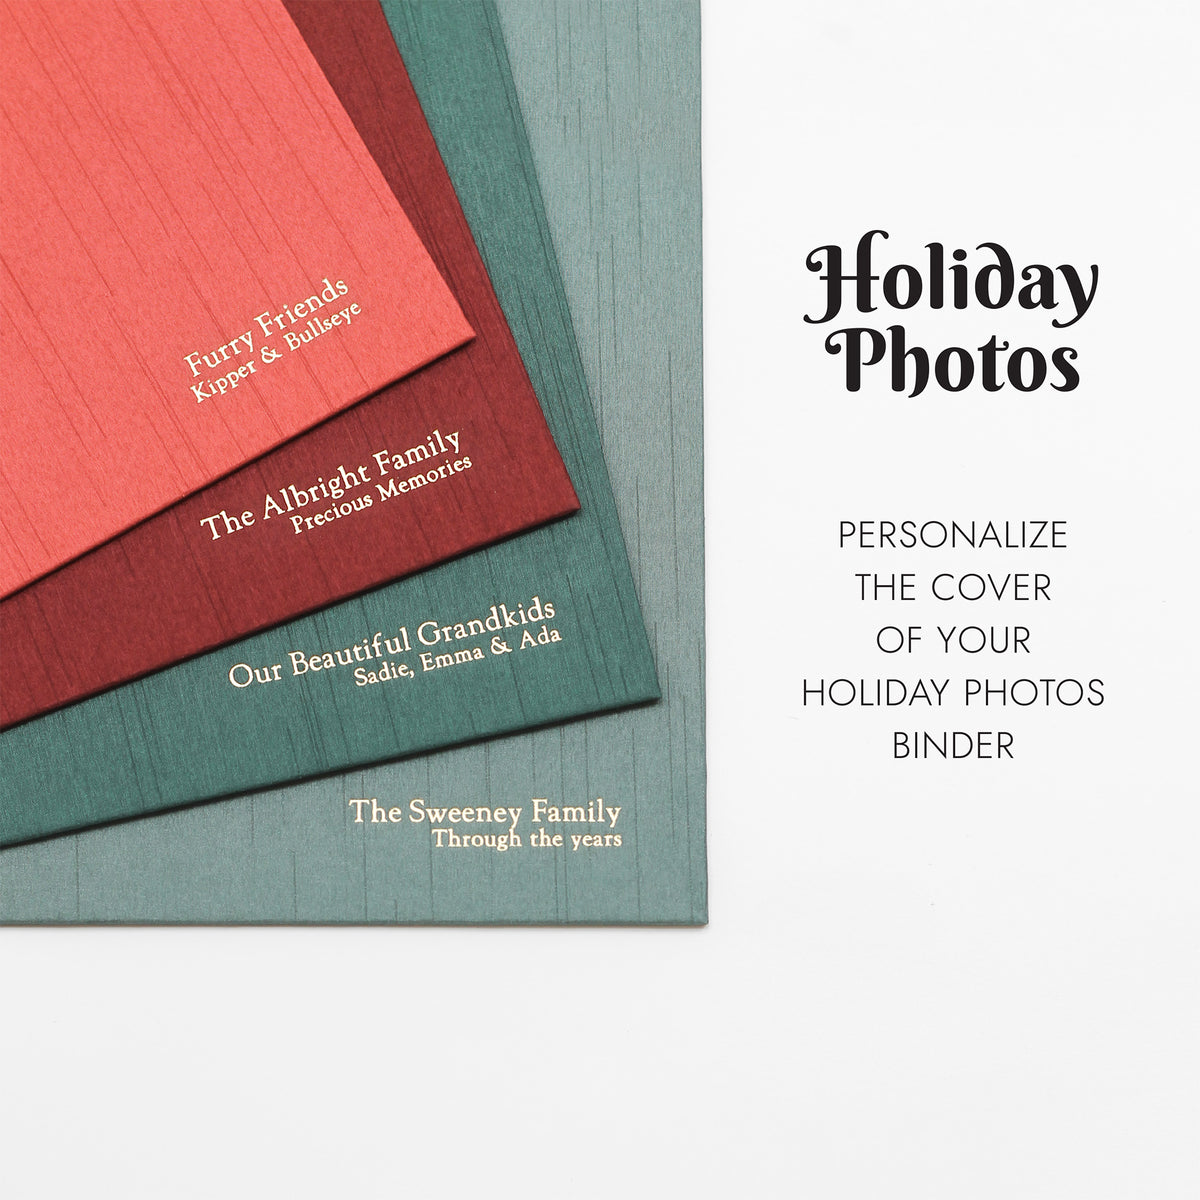 Medium Holiday Photo Binder with Natural Linen Cover for 4x6 Photos